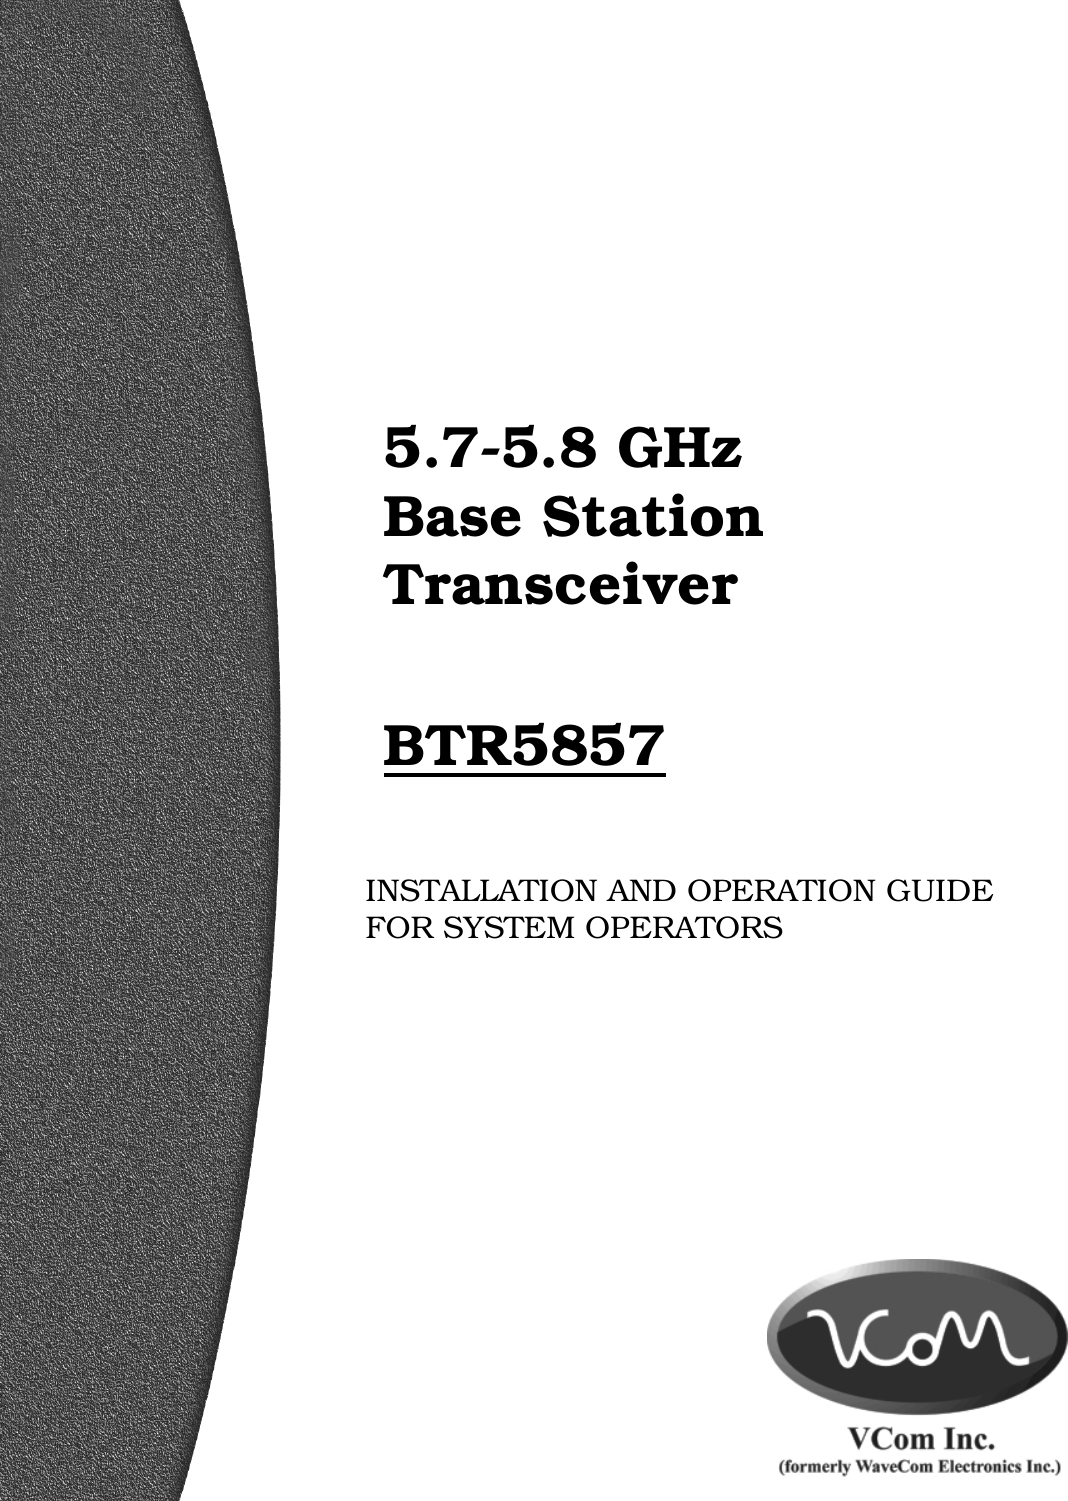   5.7-5.8 GHz  Base Station Transceiver  BTR5857   INSTALLATION AND OPERATION GUIDE FOR SYSTEM OPERATORS 